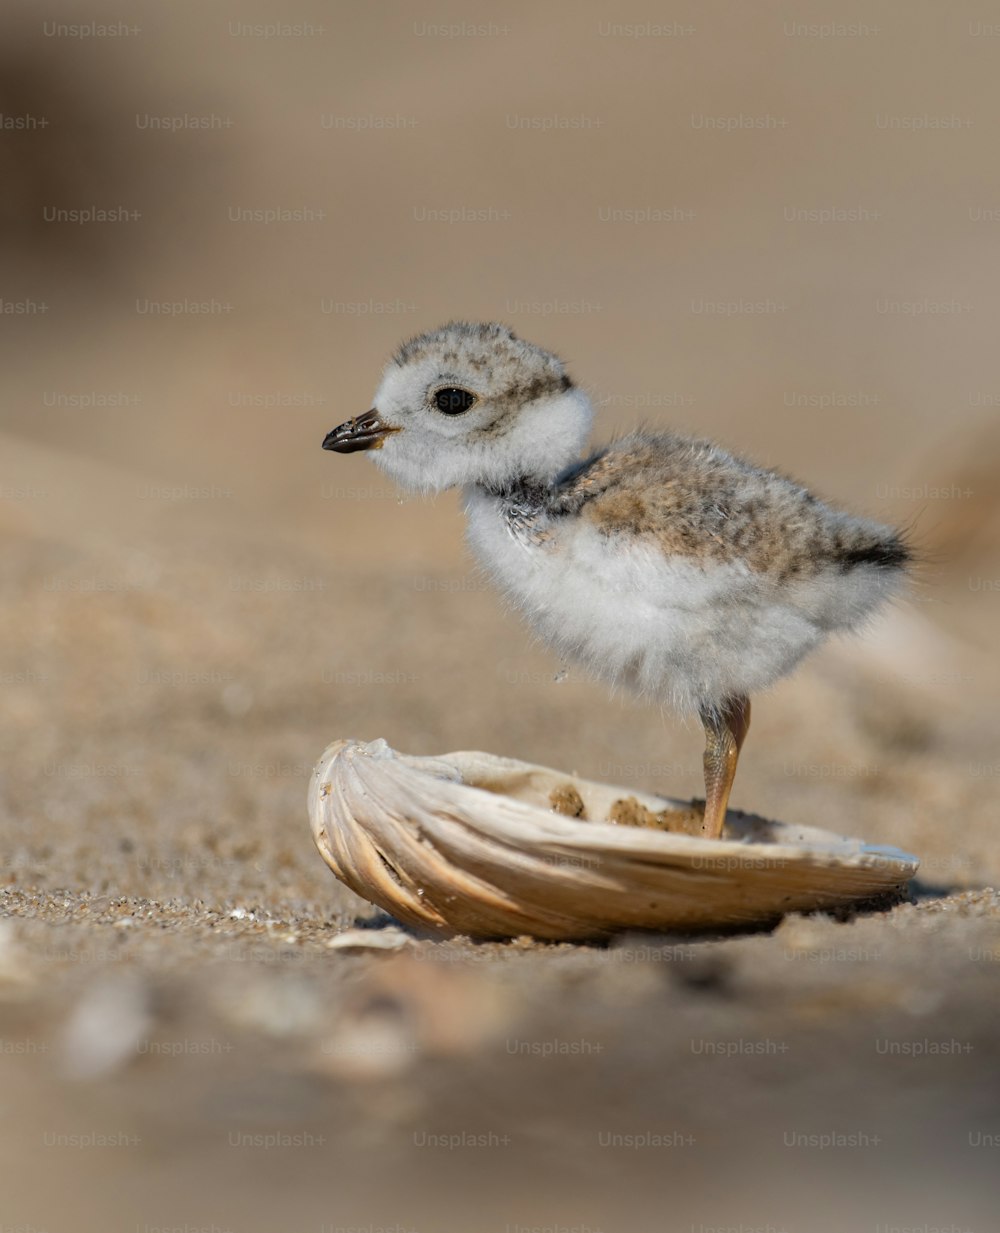 An endangered piping plover on the beach.